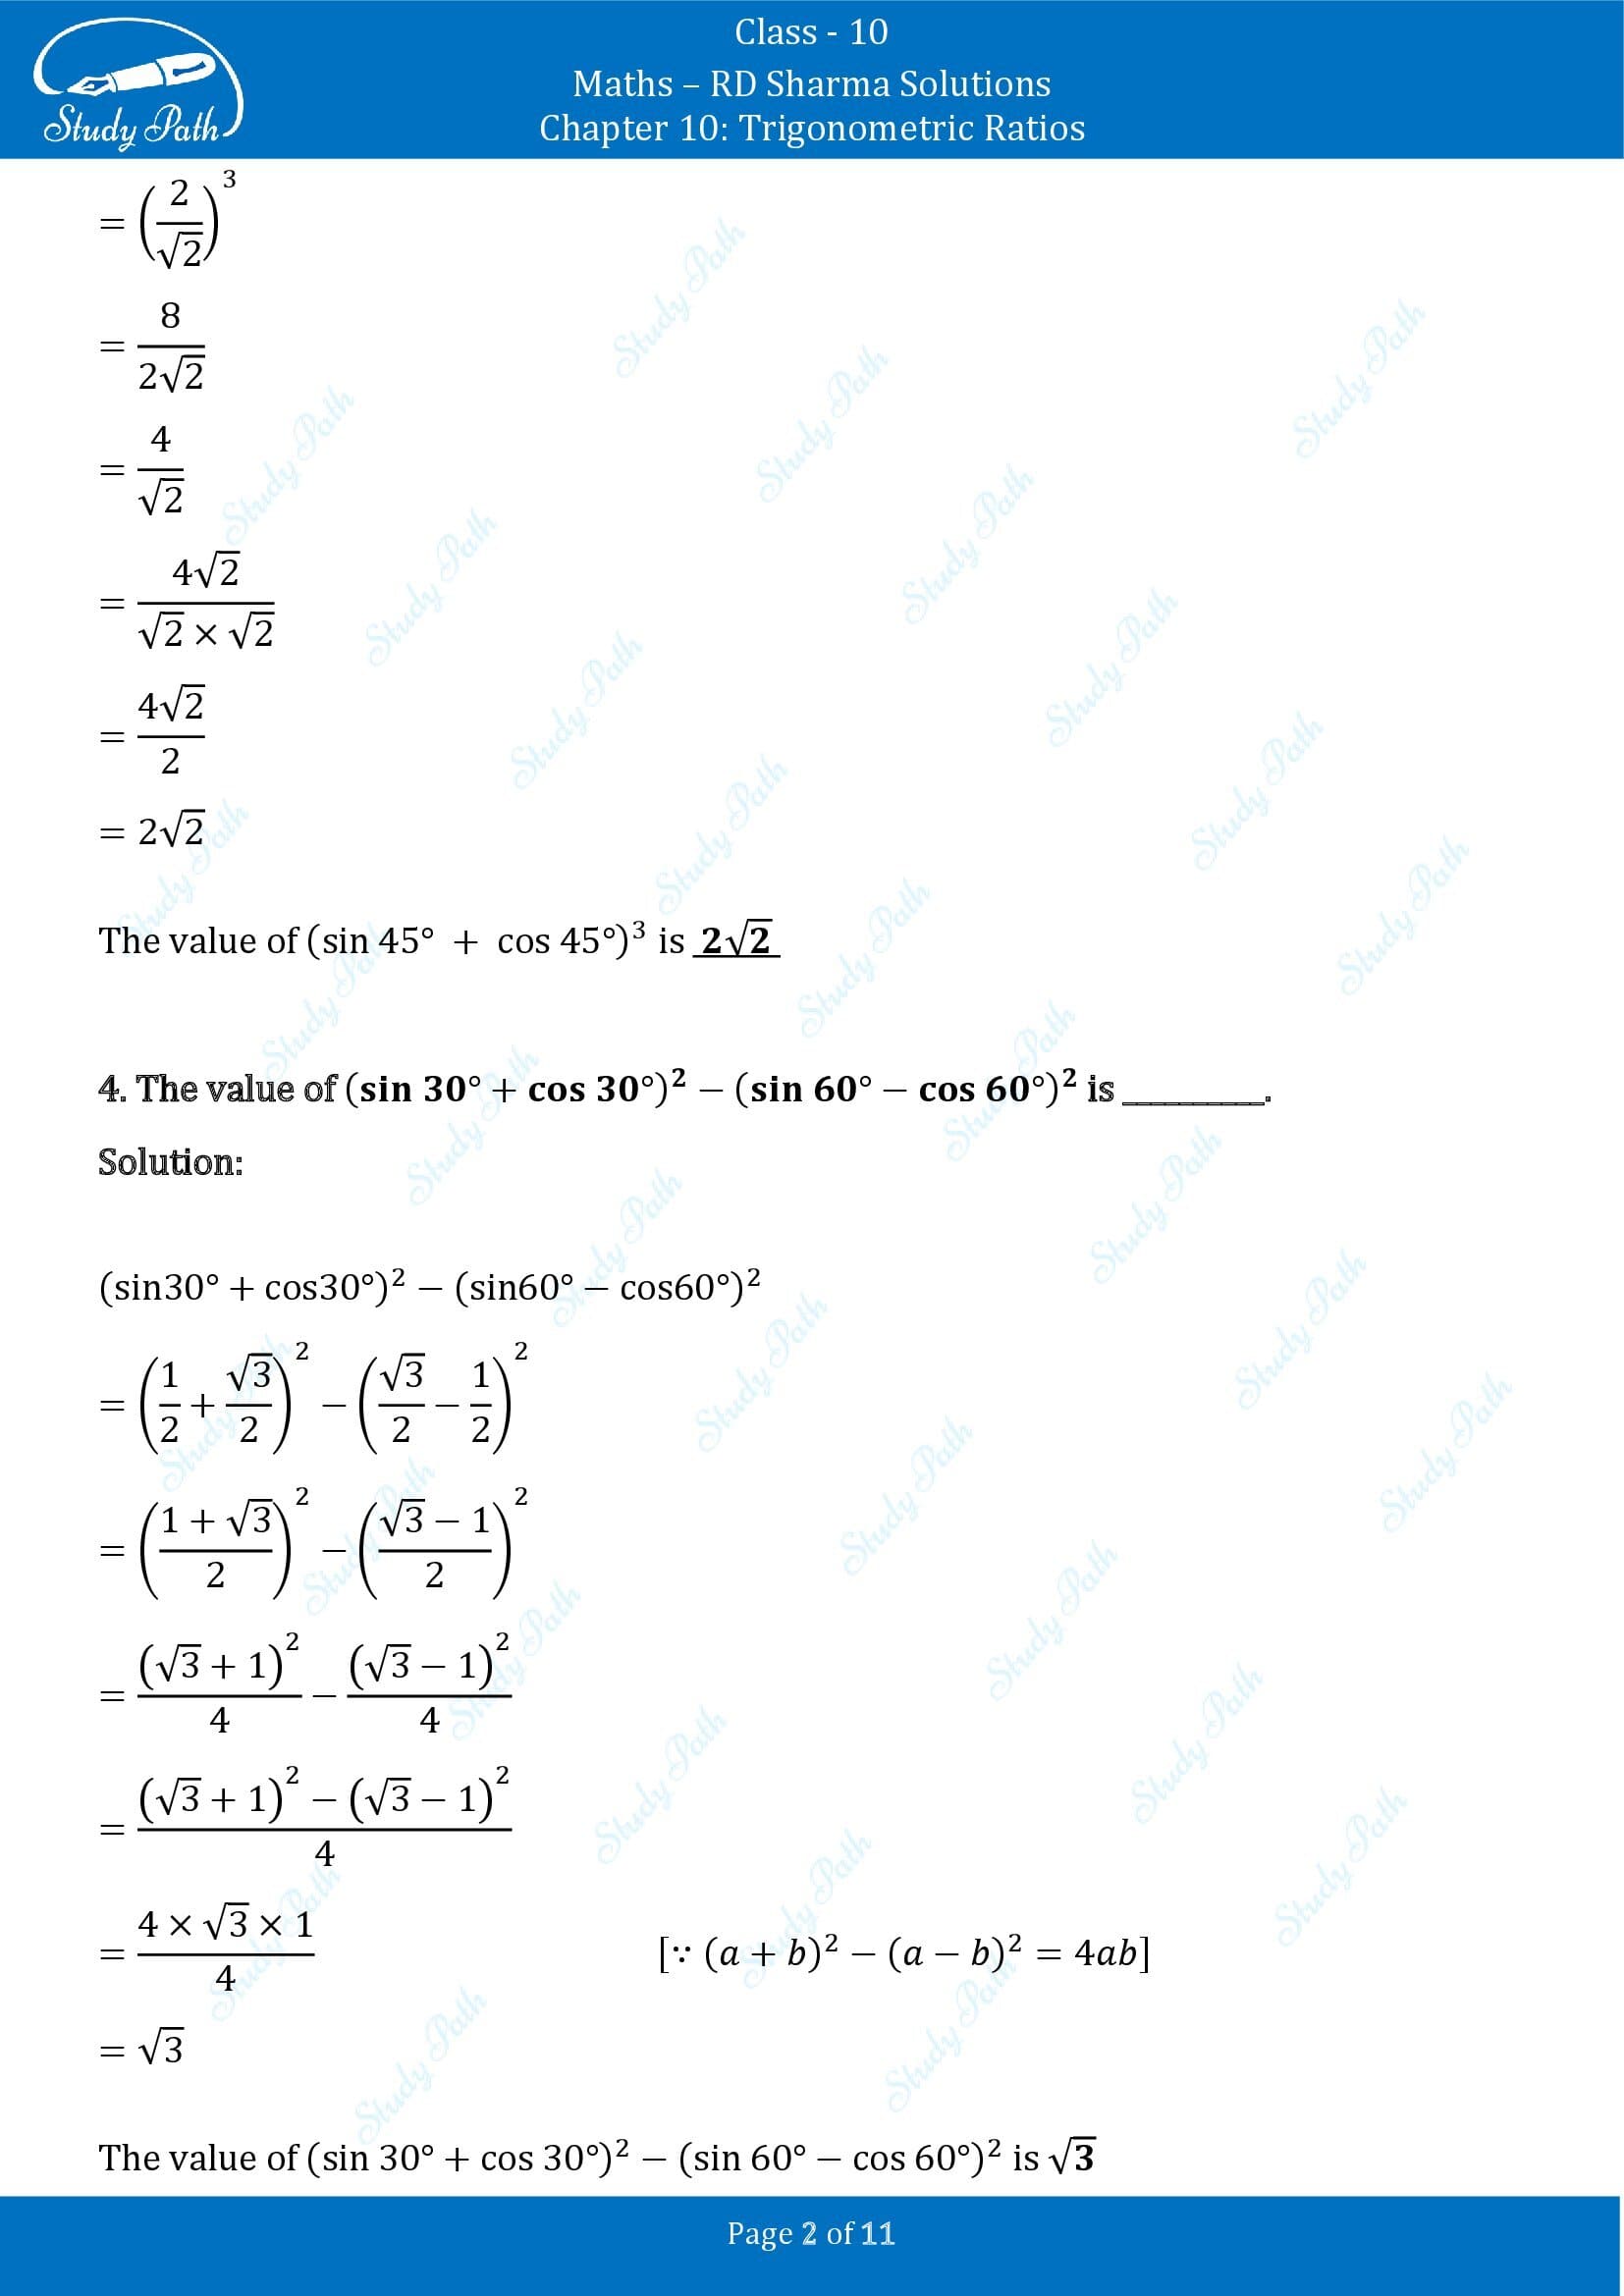 RD Sharma Solutions Class 10 Chapter 10 Trigonometric Ratios Fill in the Blank Type Questions FBQs 00002